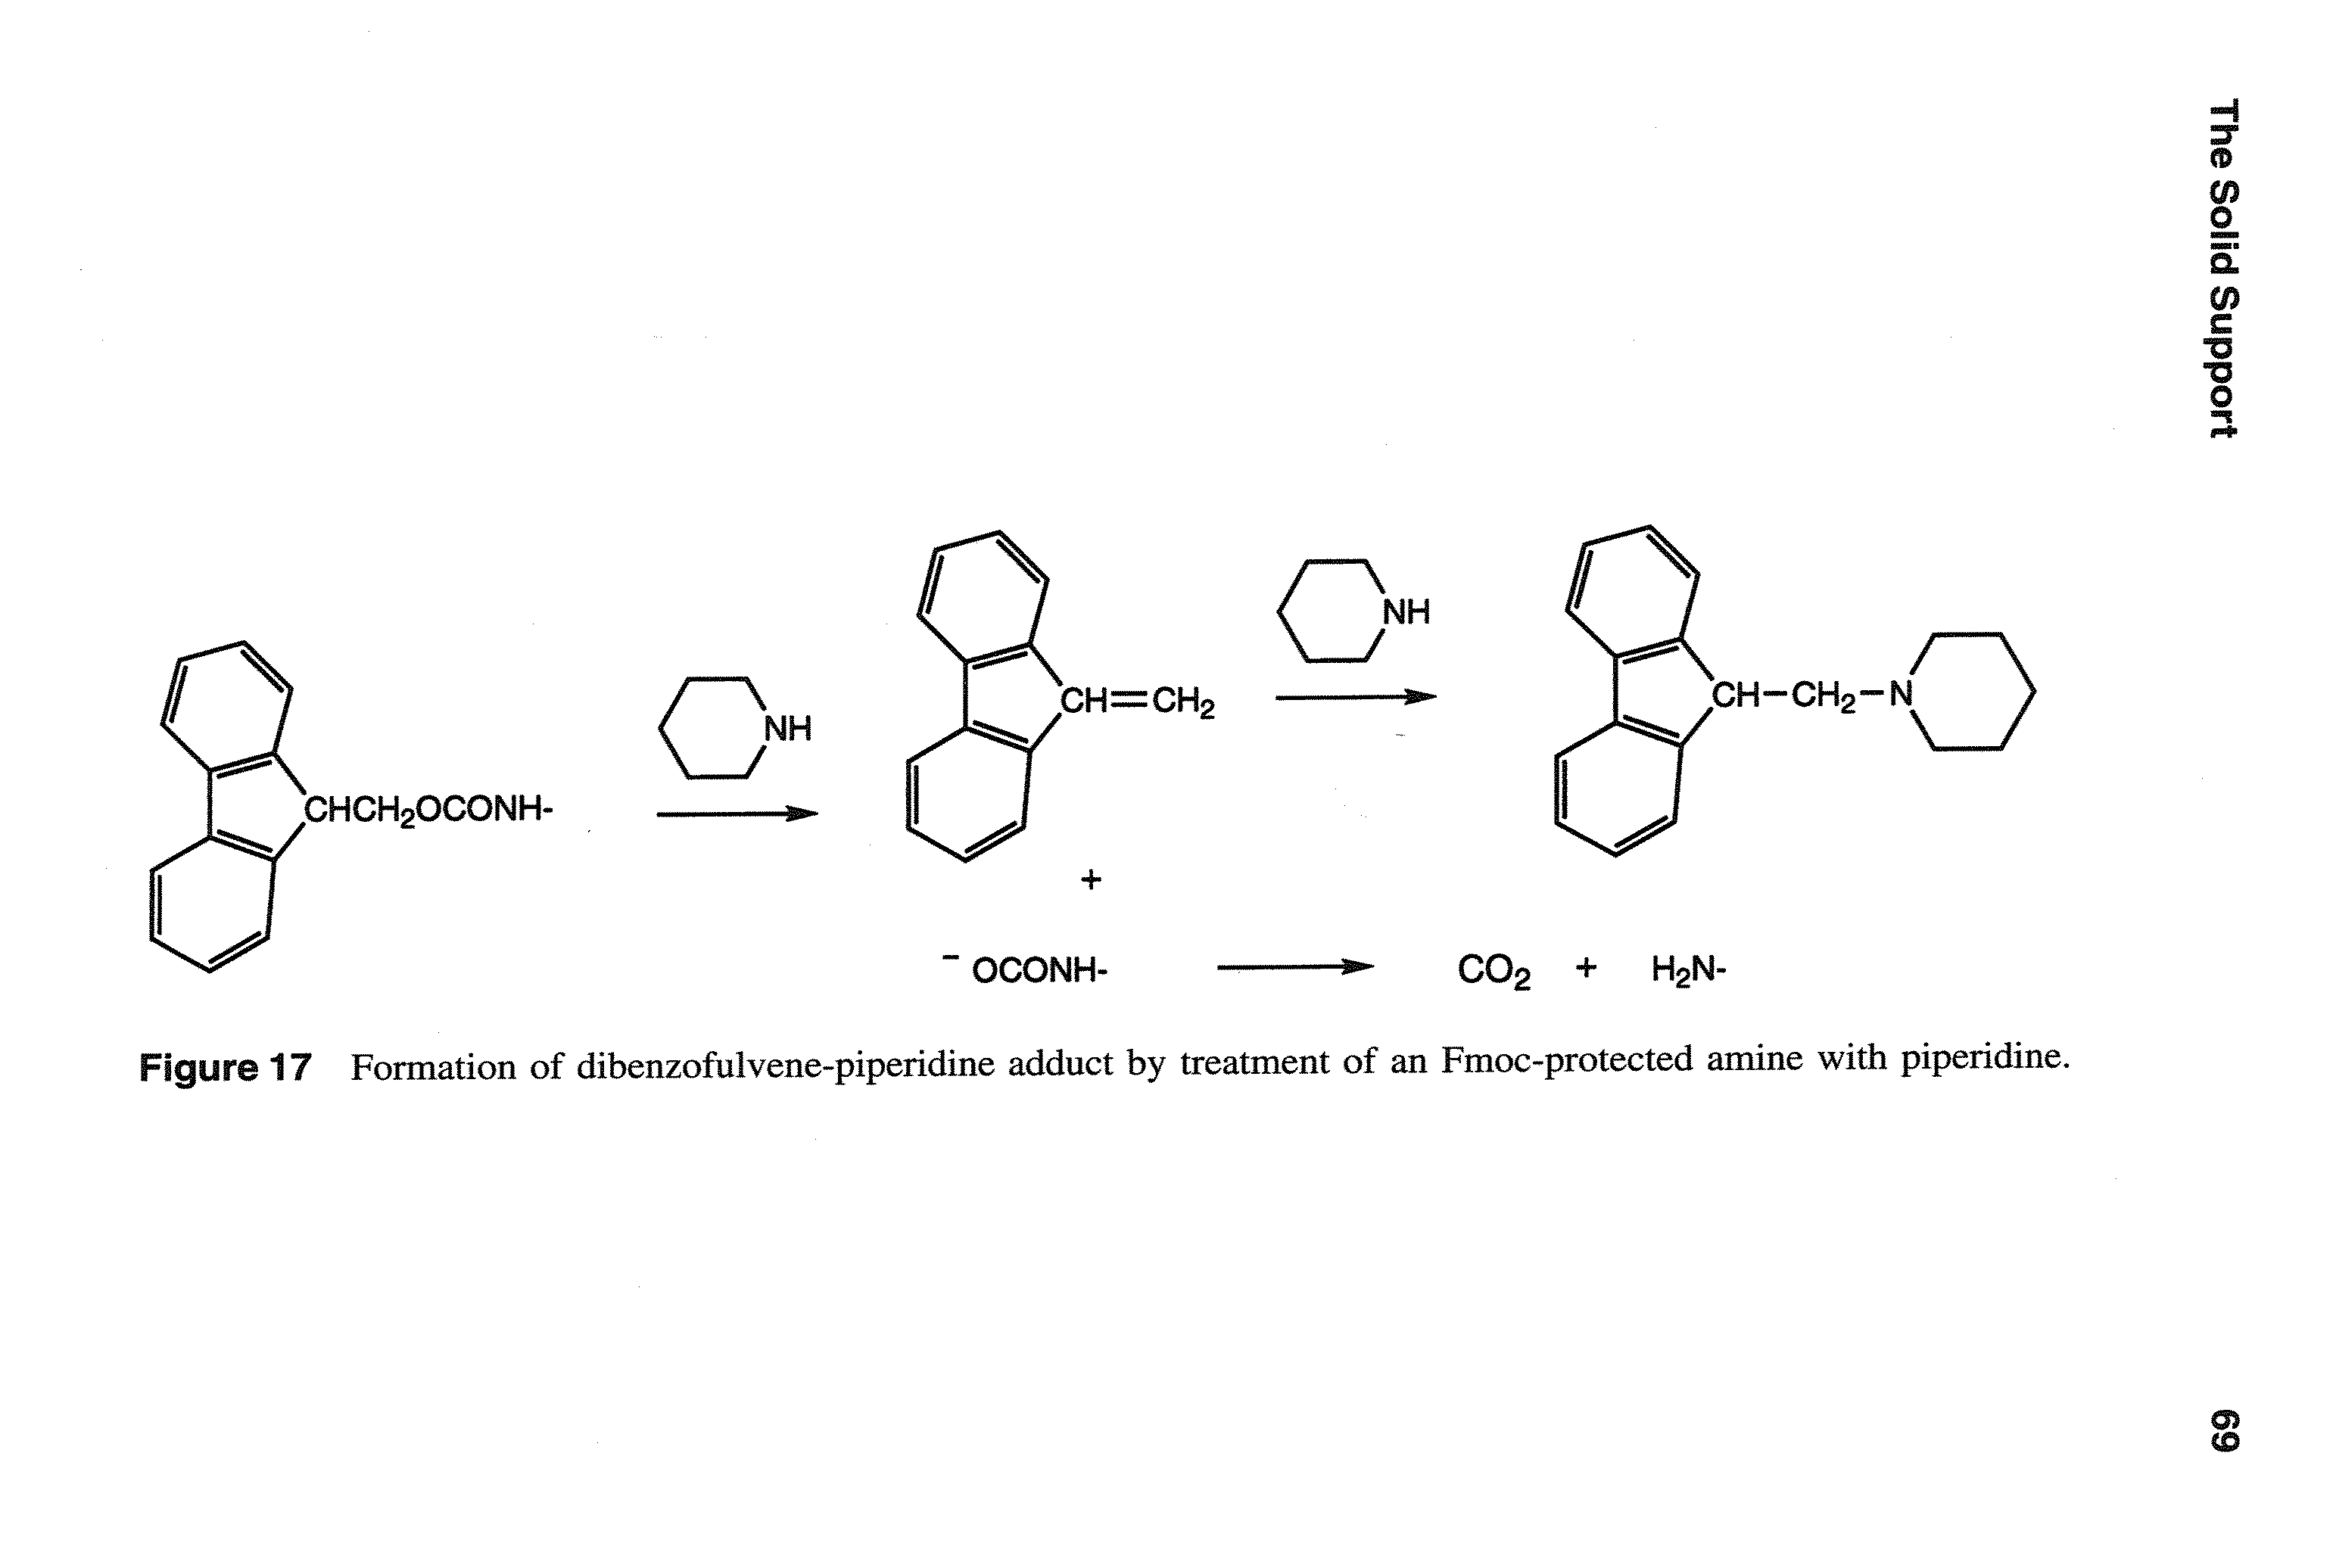 Figure 17 Formation of dibenzofulvene-piperidine adduct by treatment of an Fmoc-protected amine with piperidine.